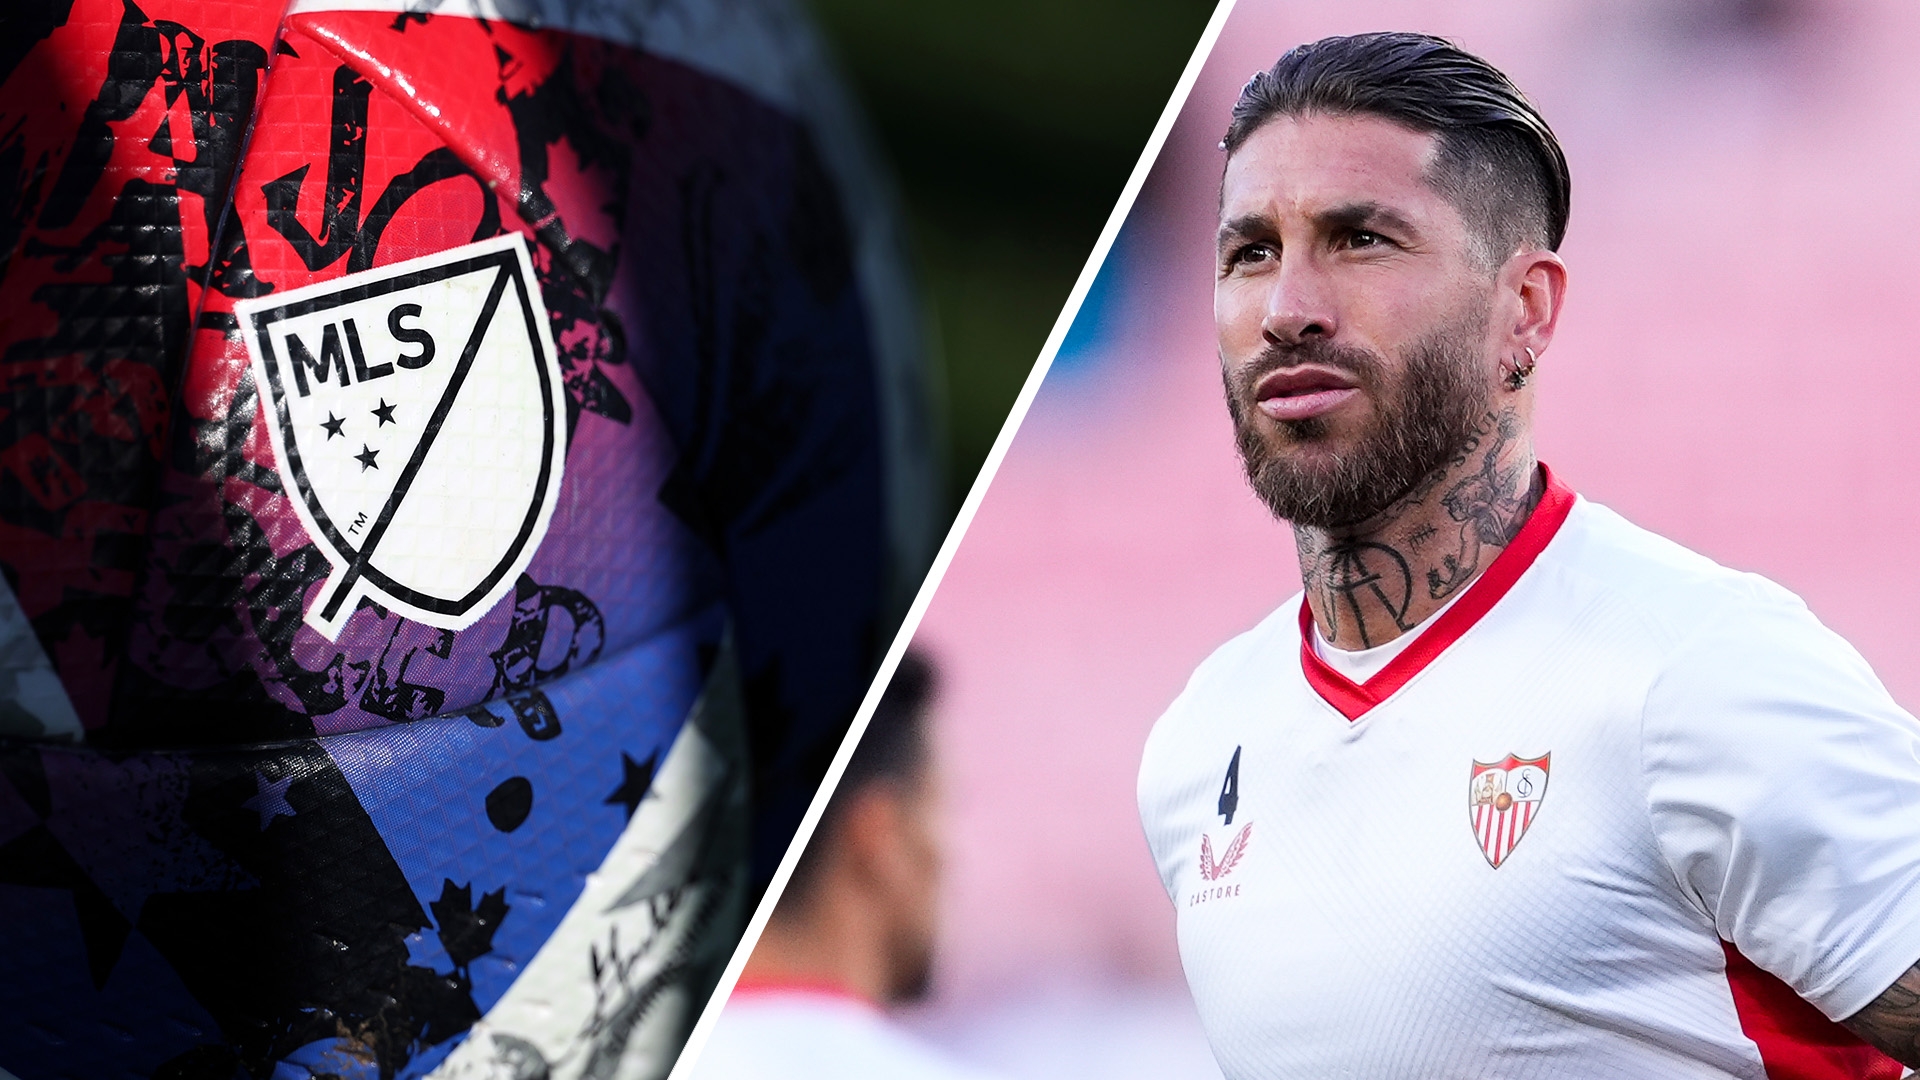 Why San Diego would be a 'homerun move' for Sergio Ramos